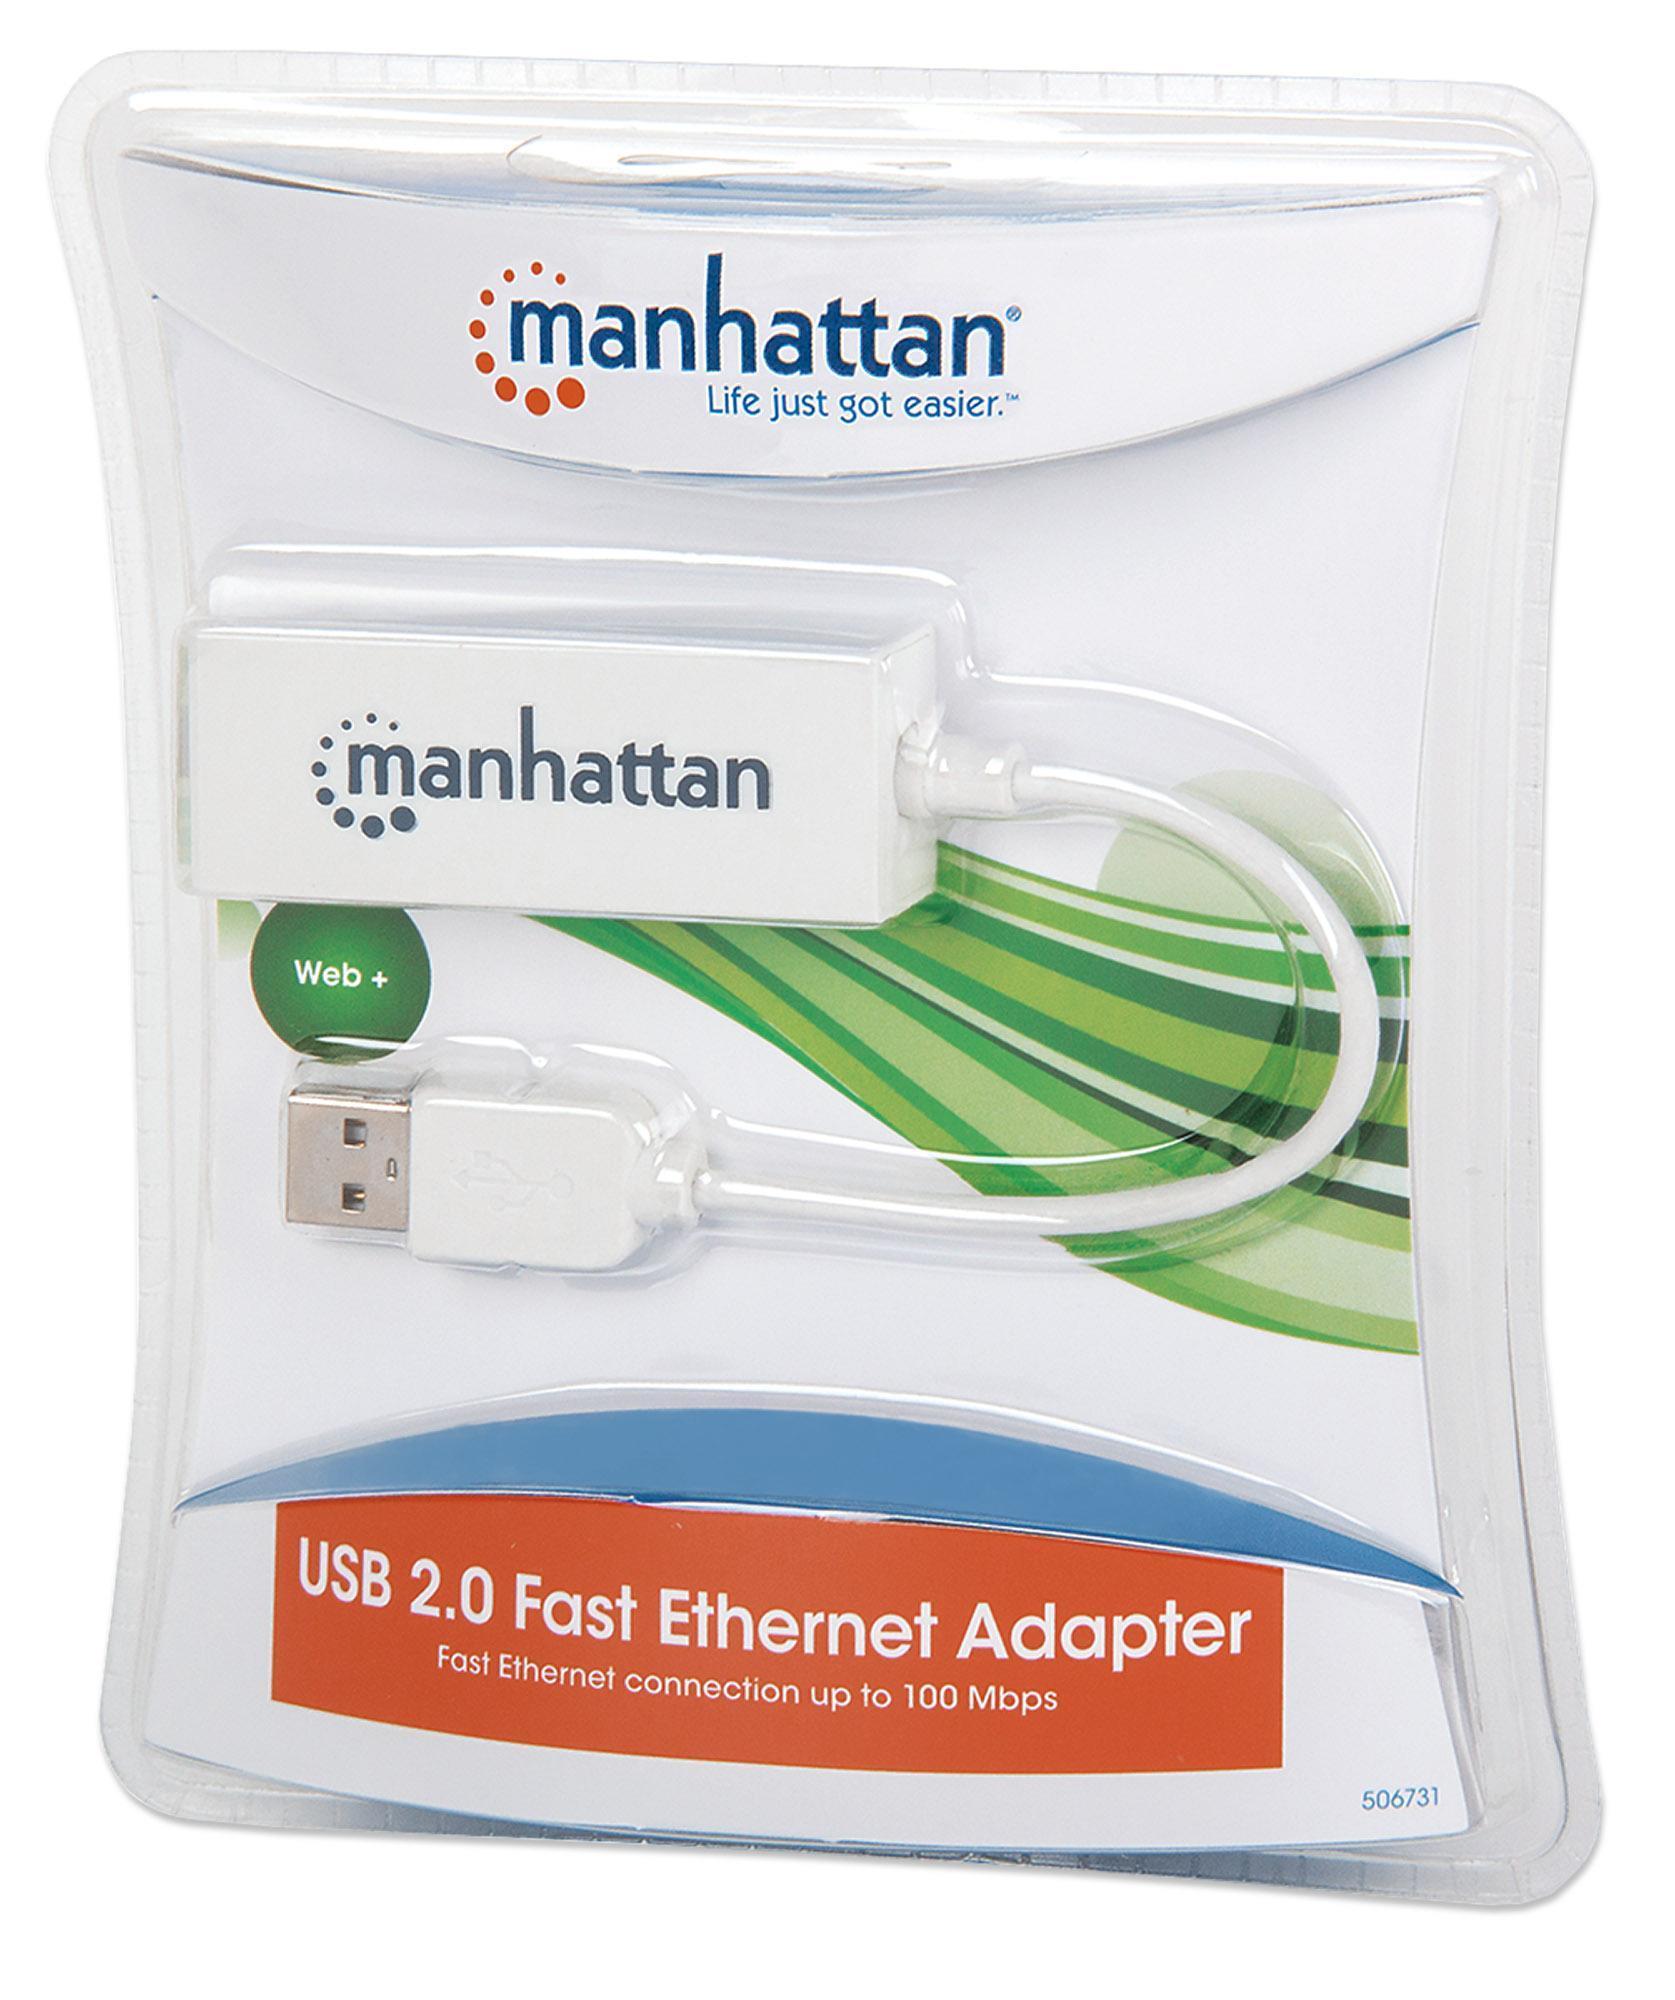 Fast adapter